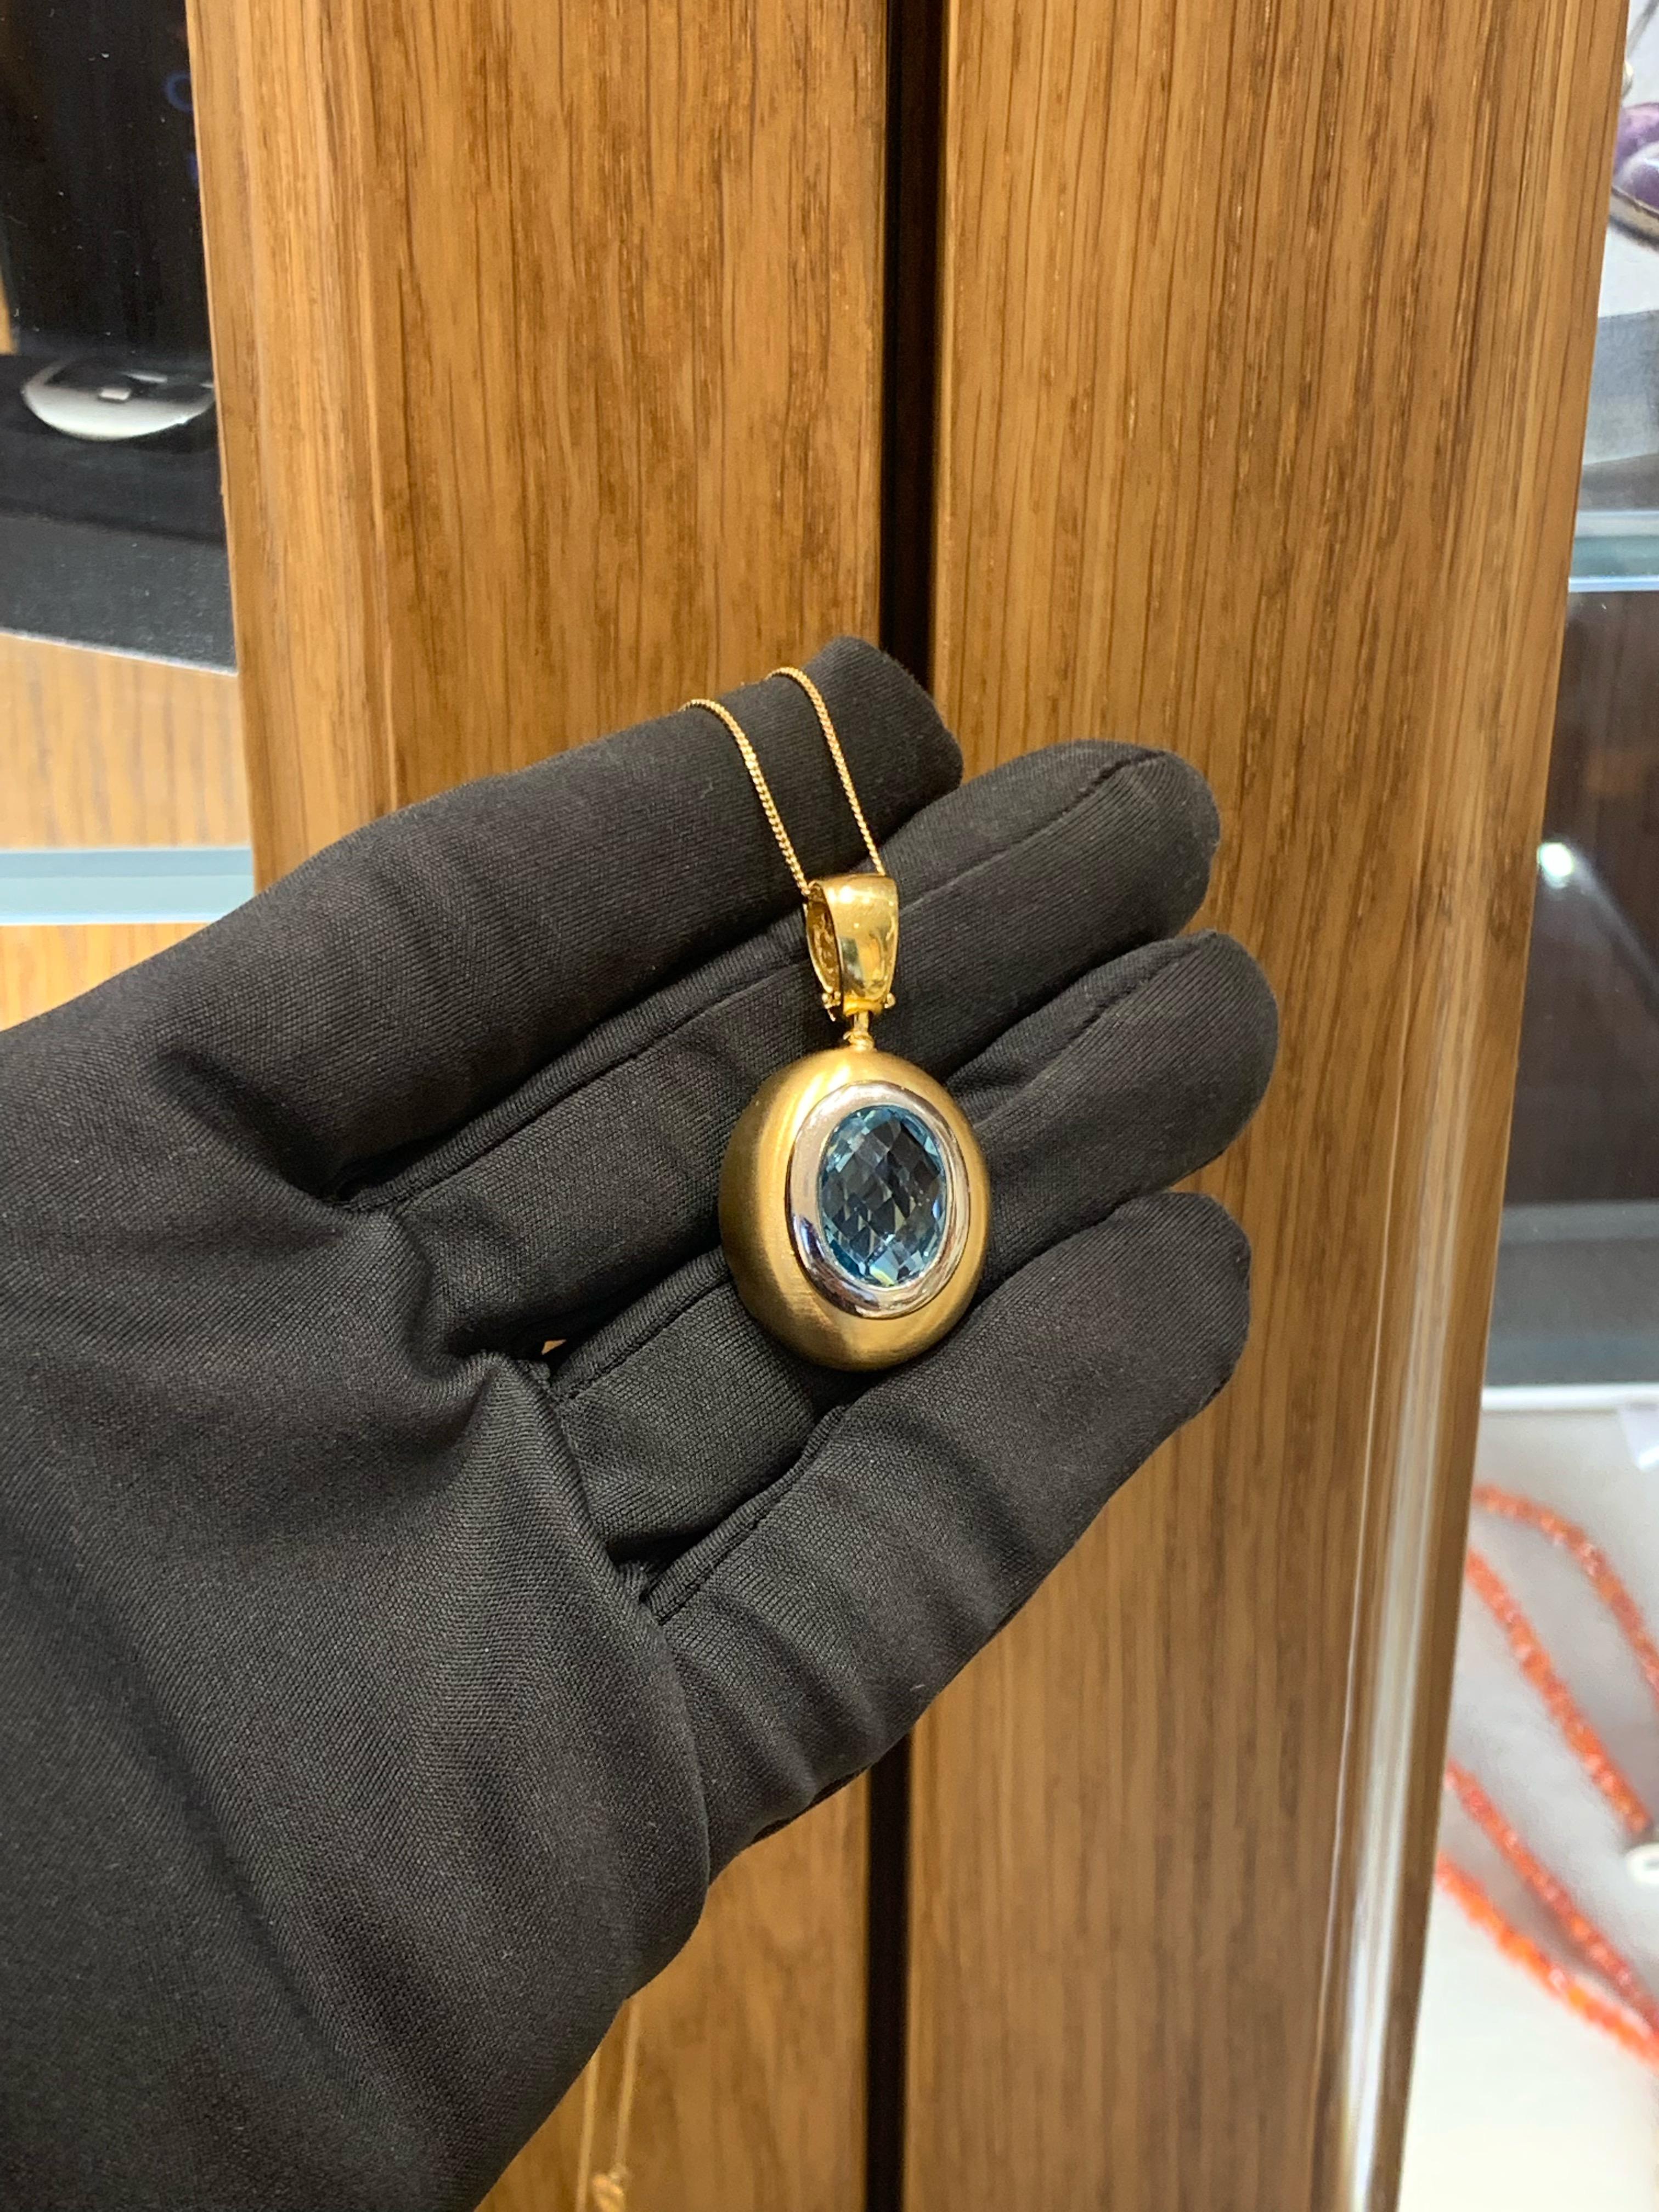 Beautifully Hand Crafted 14k Yellow Pendant Set With a Blue Topaz Stone, Surrounded By a 14k White Gold Bezel.
Amazing Shine, Incredible Craftsmanship.
Approximately 5.0 Carats Topaz.
Beautiful Depth Of Color In The Stone.
Great Statement